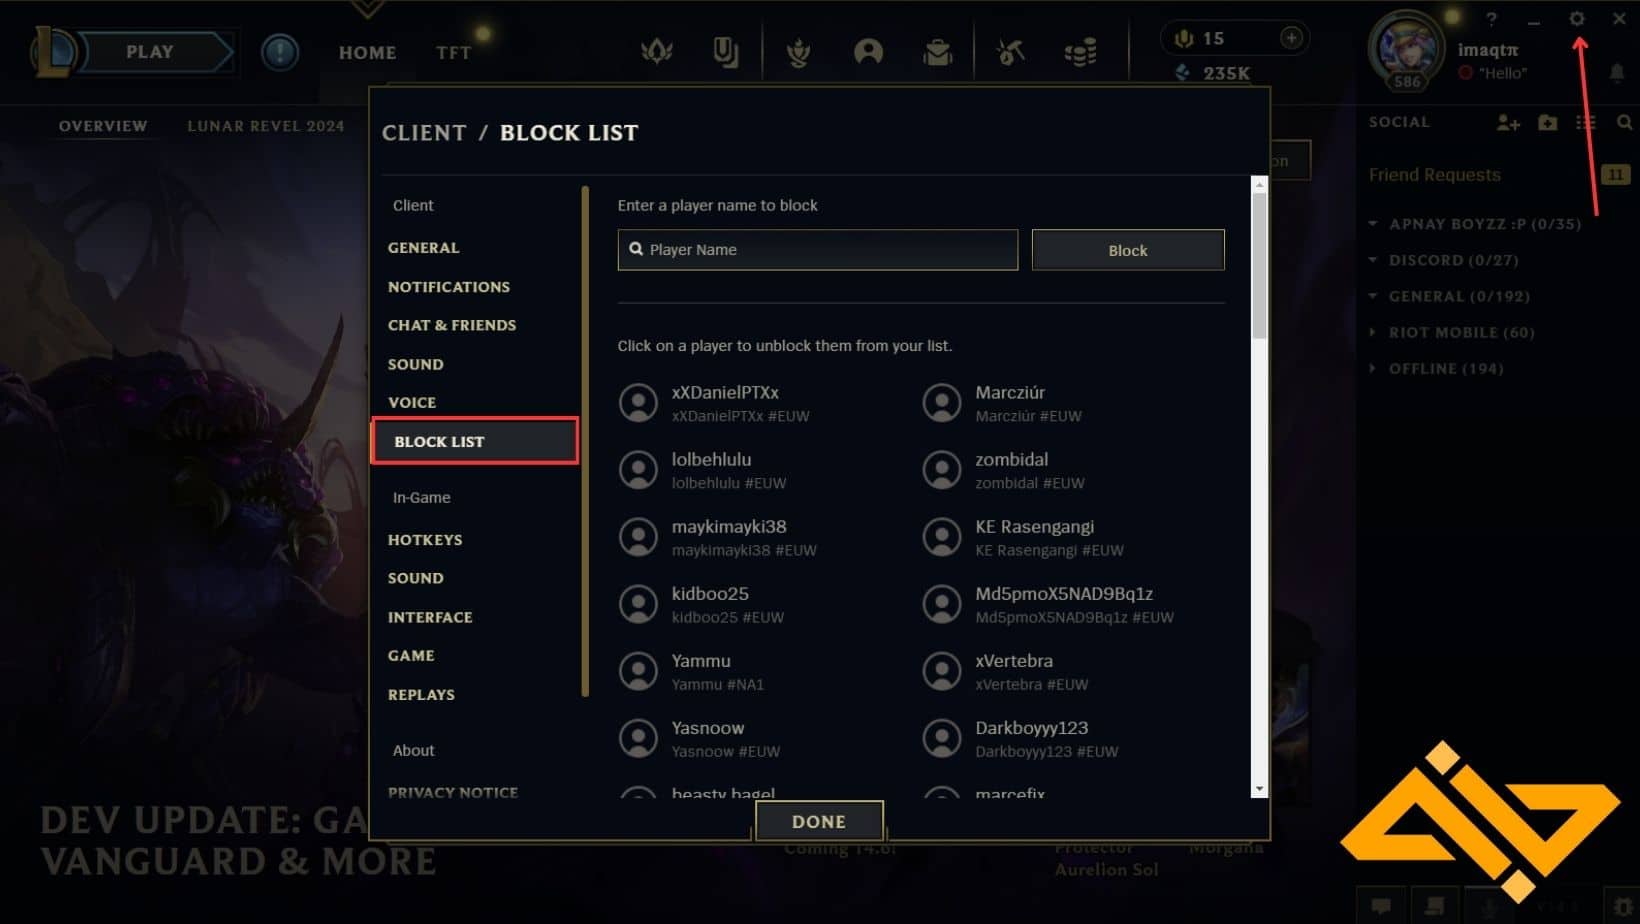 How to Unblock Someone in League of Legends